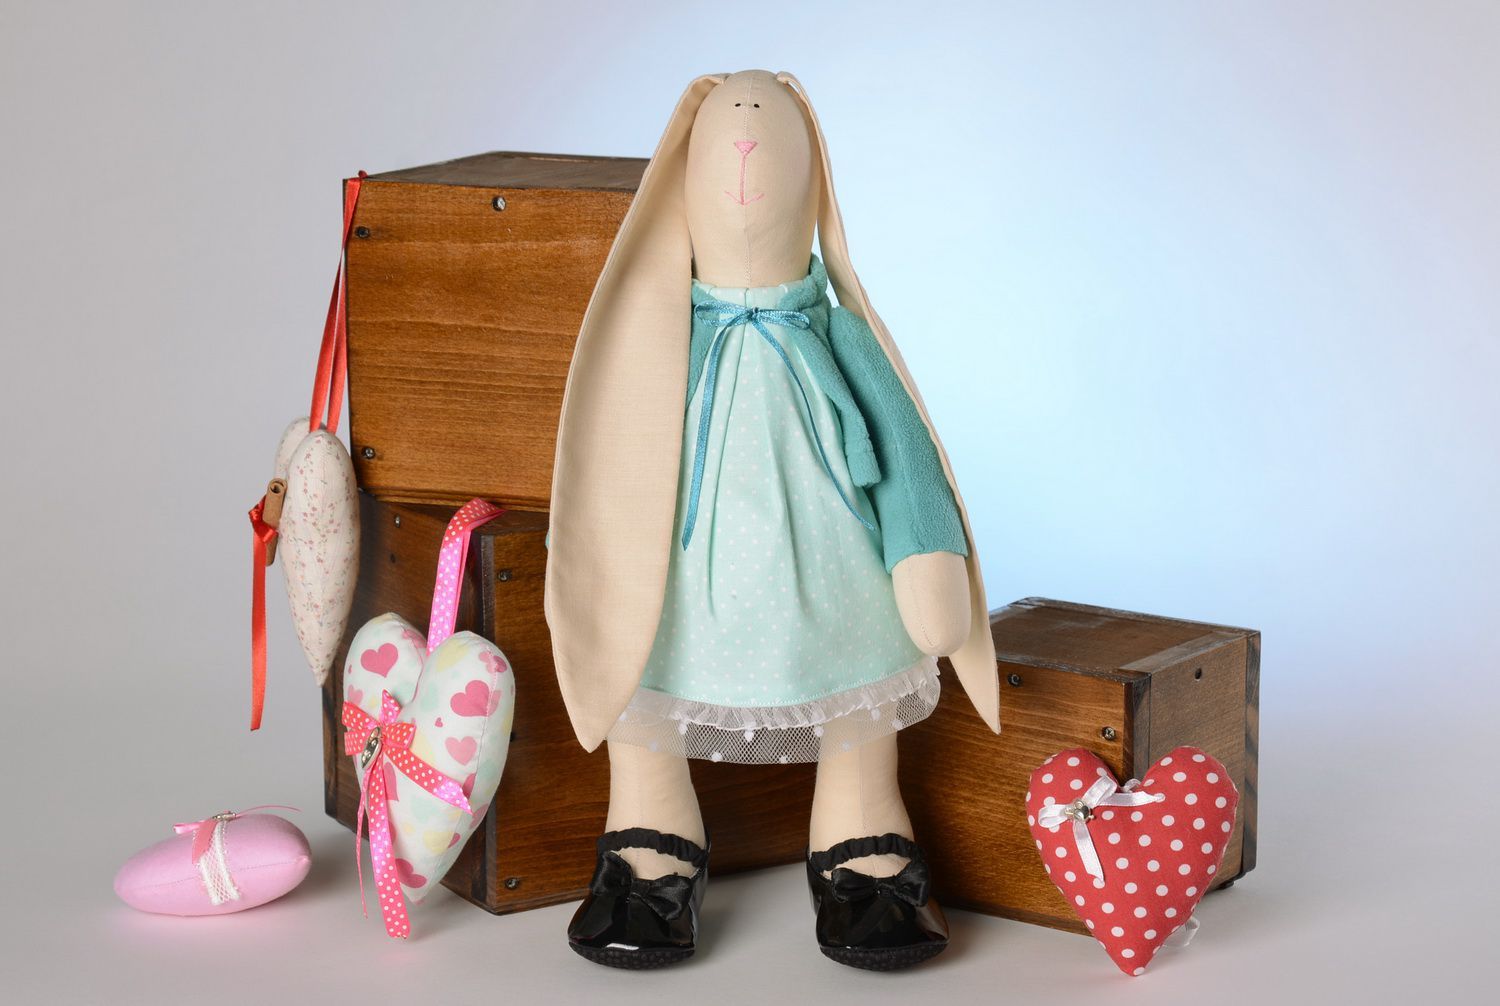 Tilde toy Hare in a dress photo 5